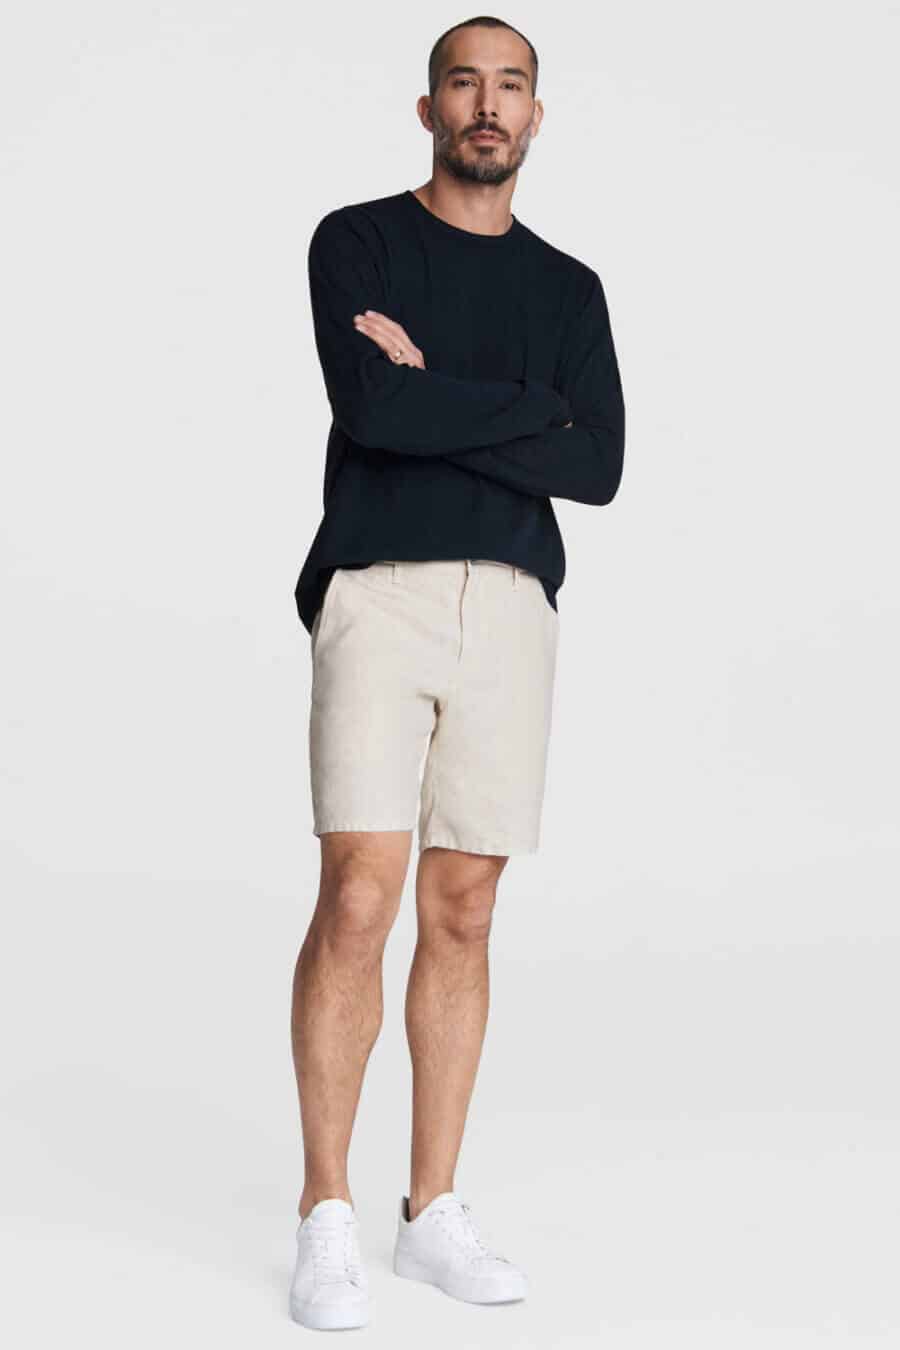 Men's linen shorts with black top and white sneakers outfit